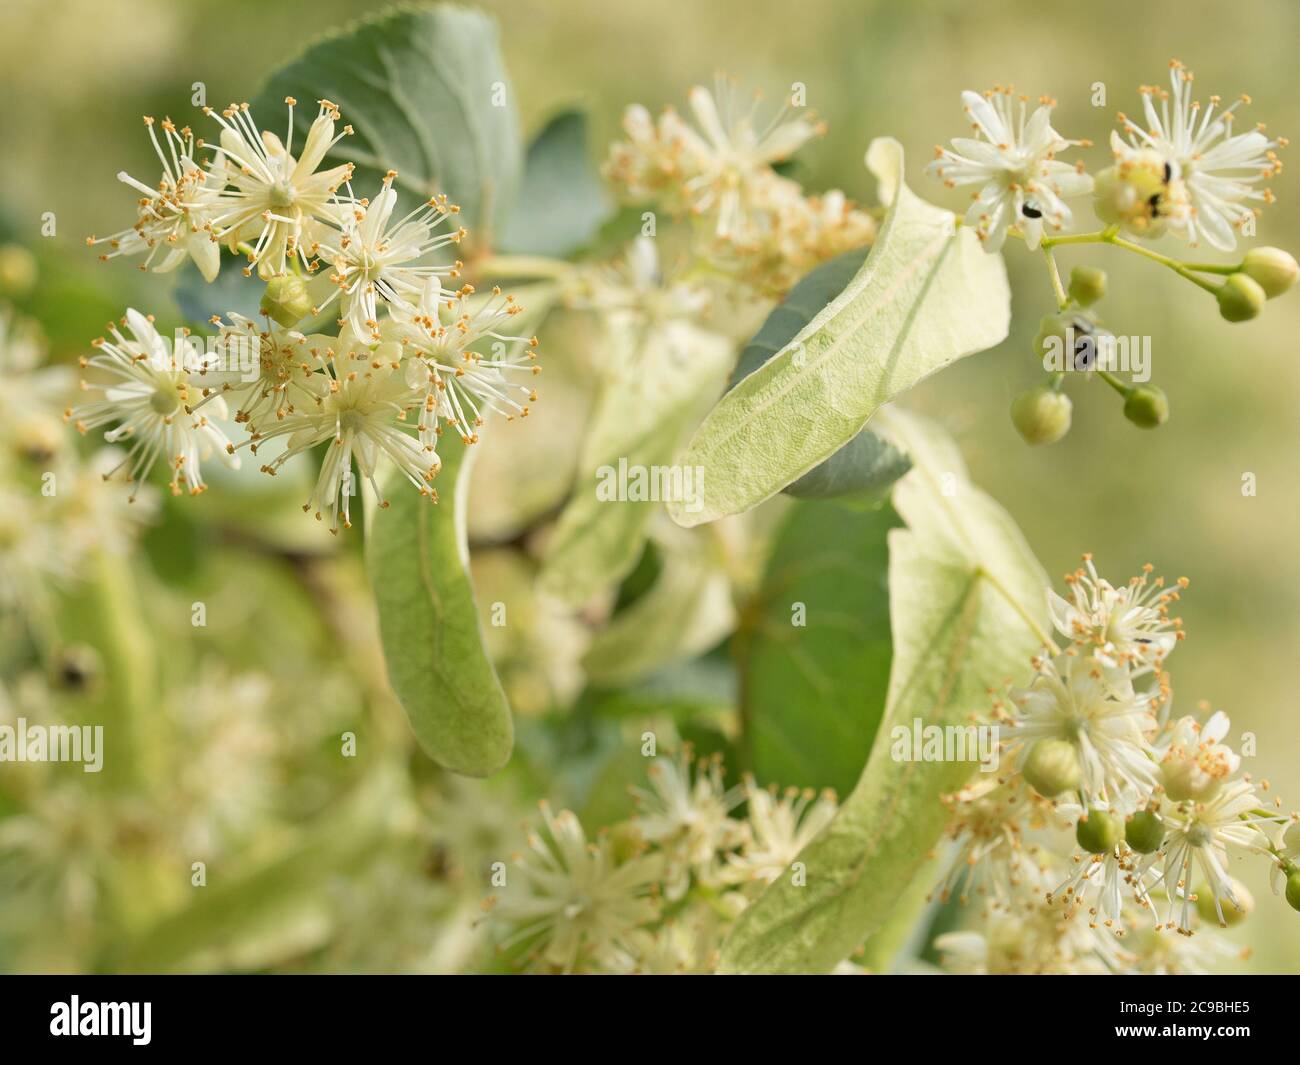 Linden flowers on the tree Stock Photo